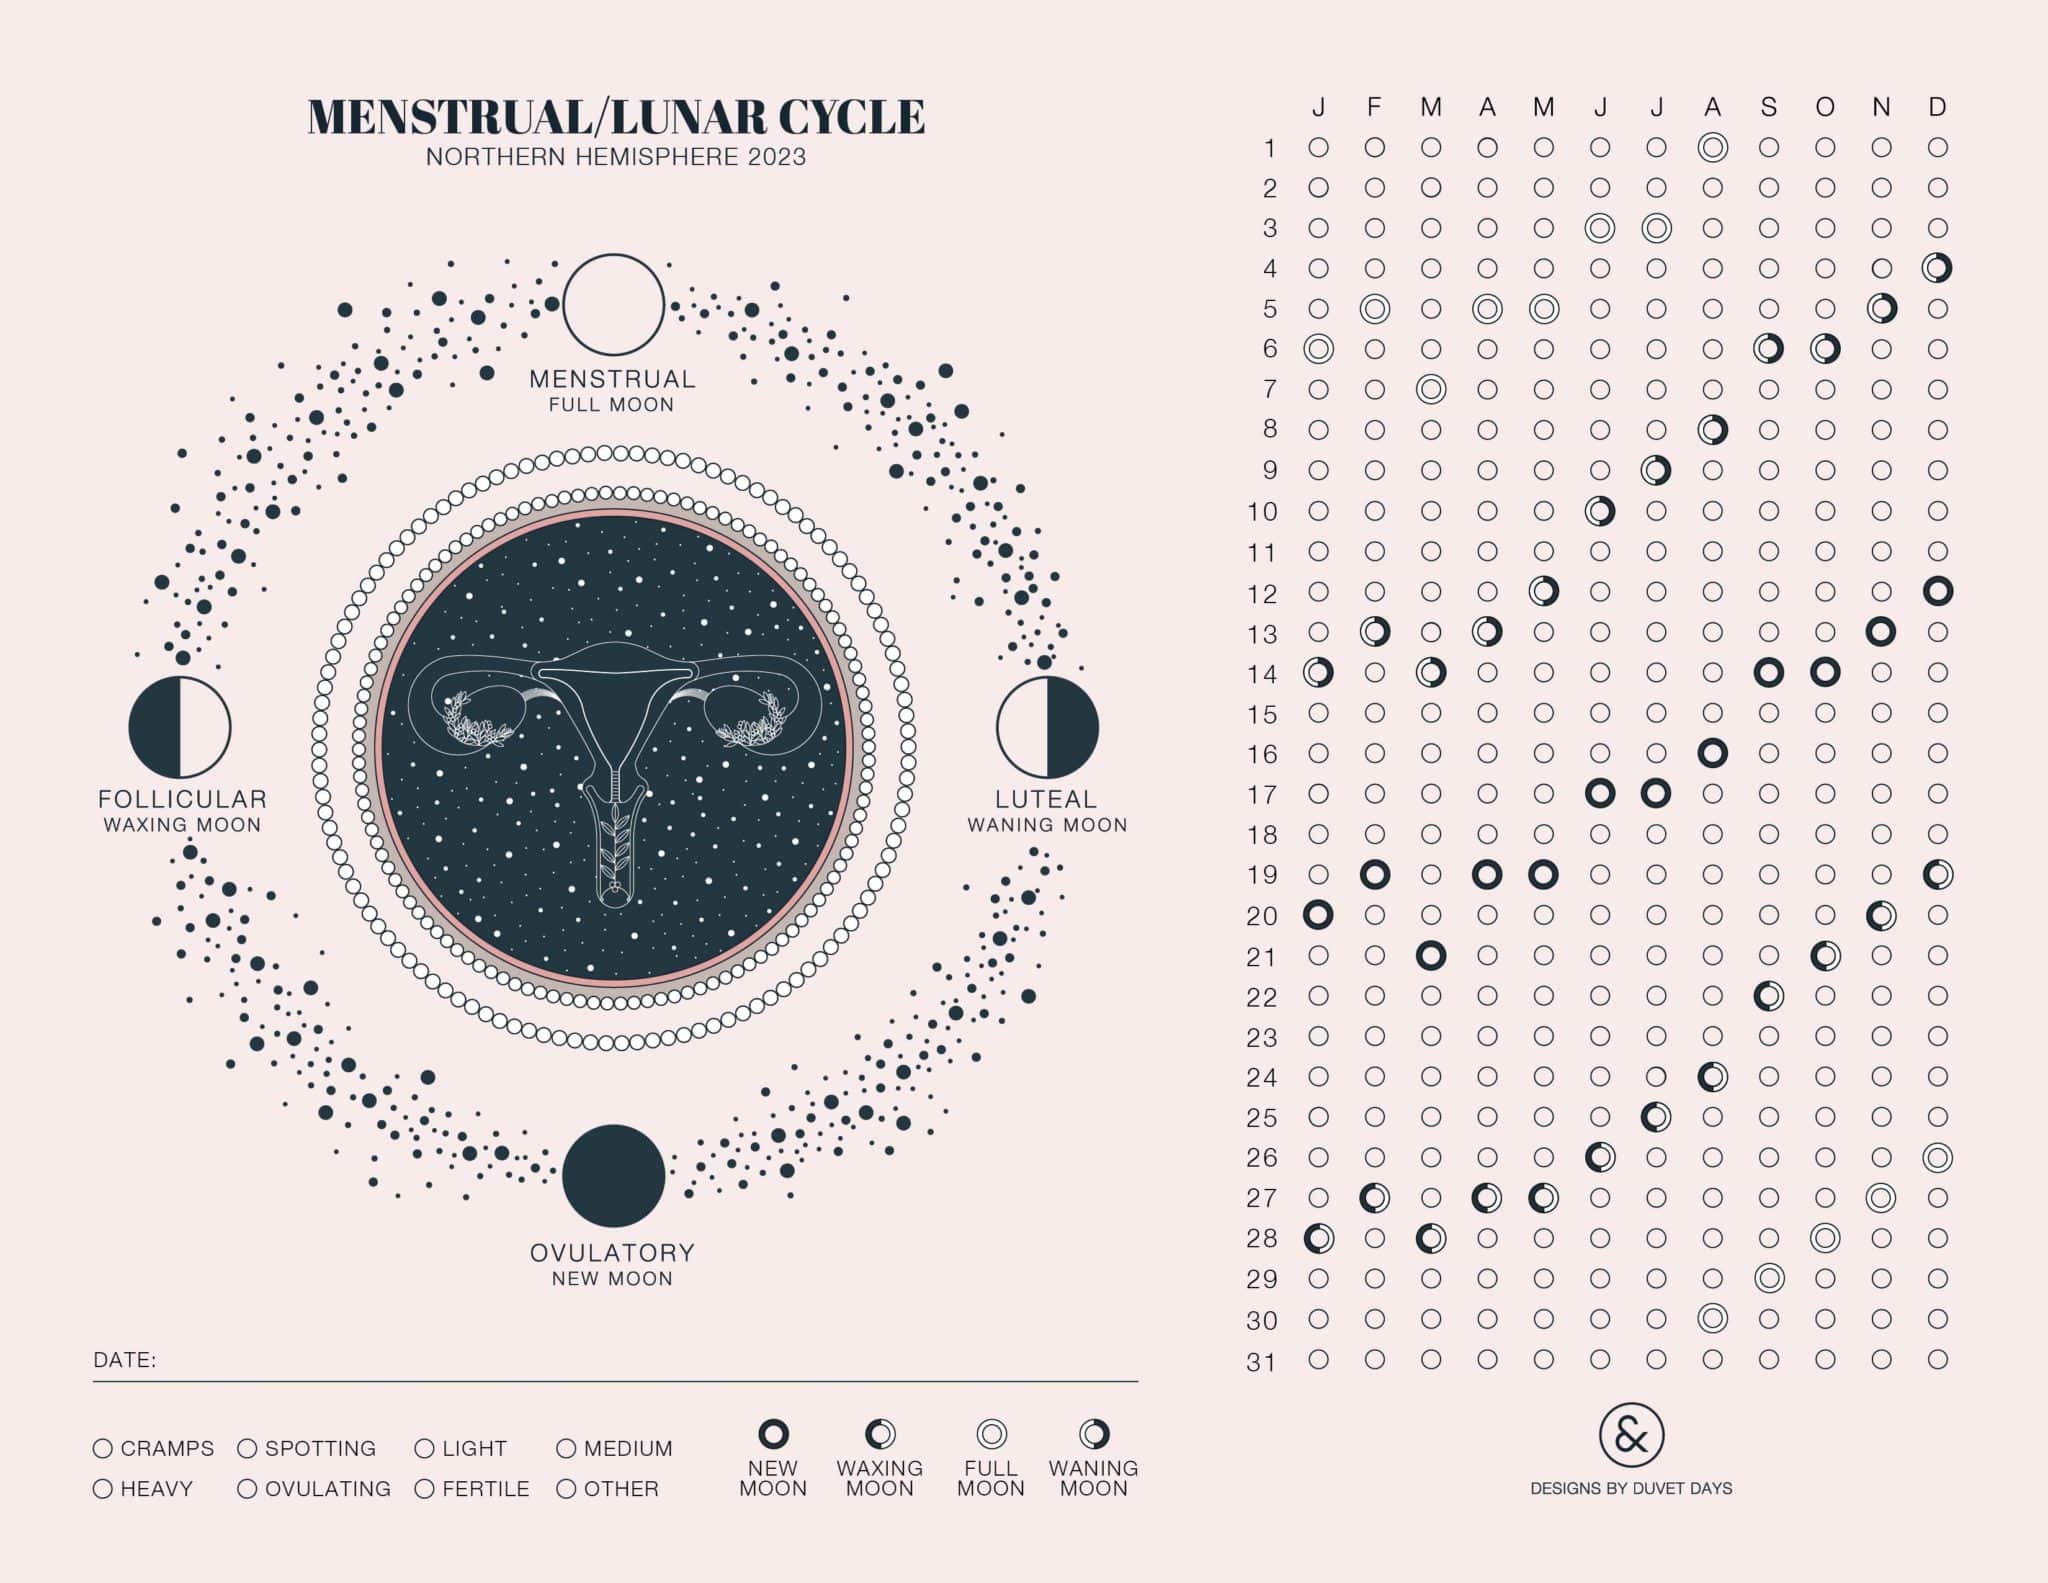 Designs By Duvet Days_8.5x11_My Menstrual-Lunar Cycle Tracking Sheet 2023_Full Moon Northern Hemisphere_Preview